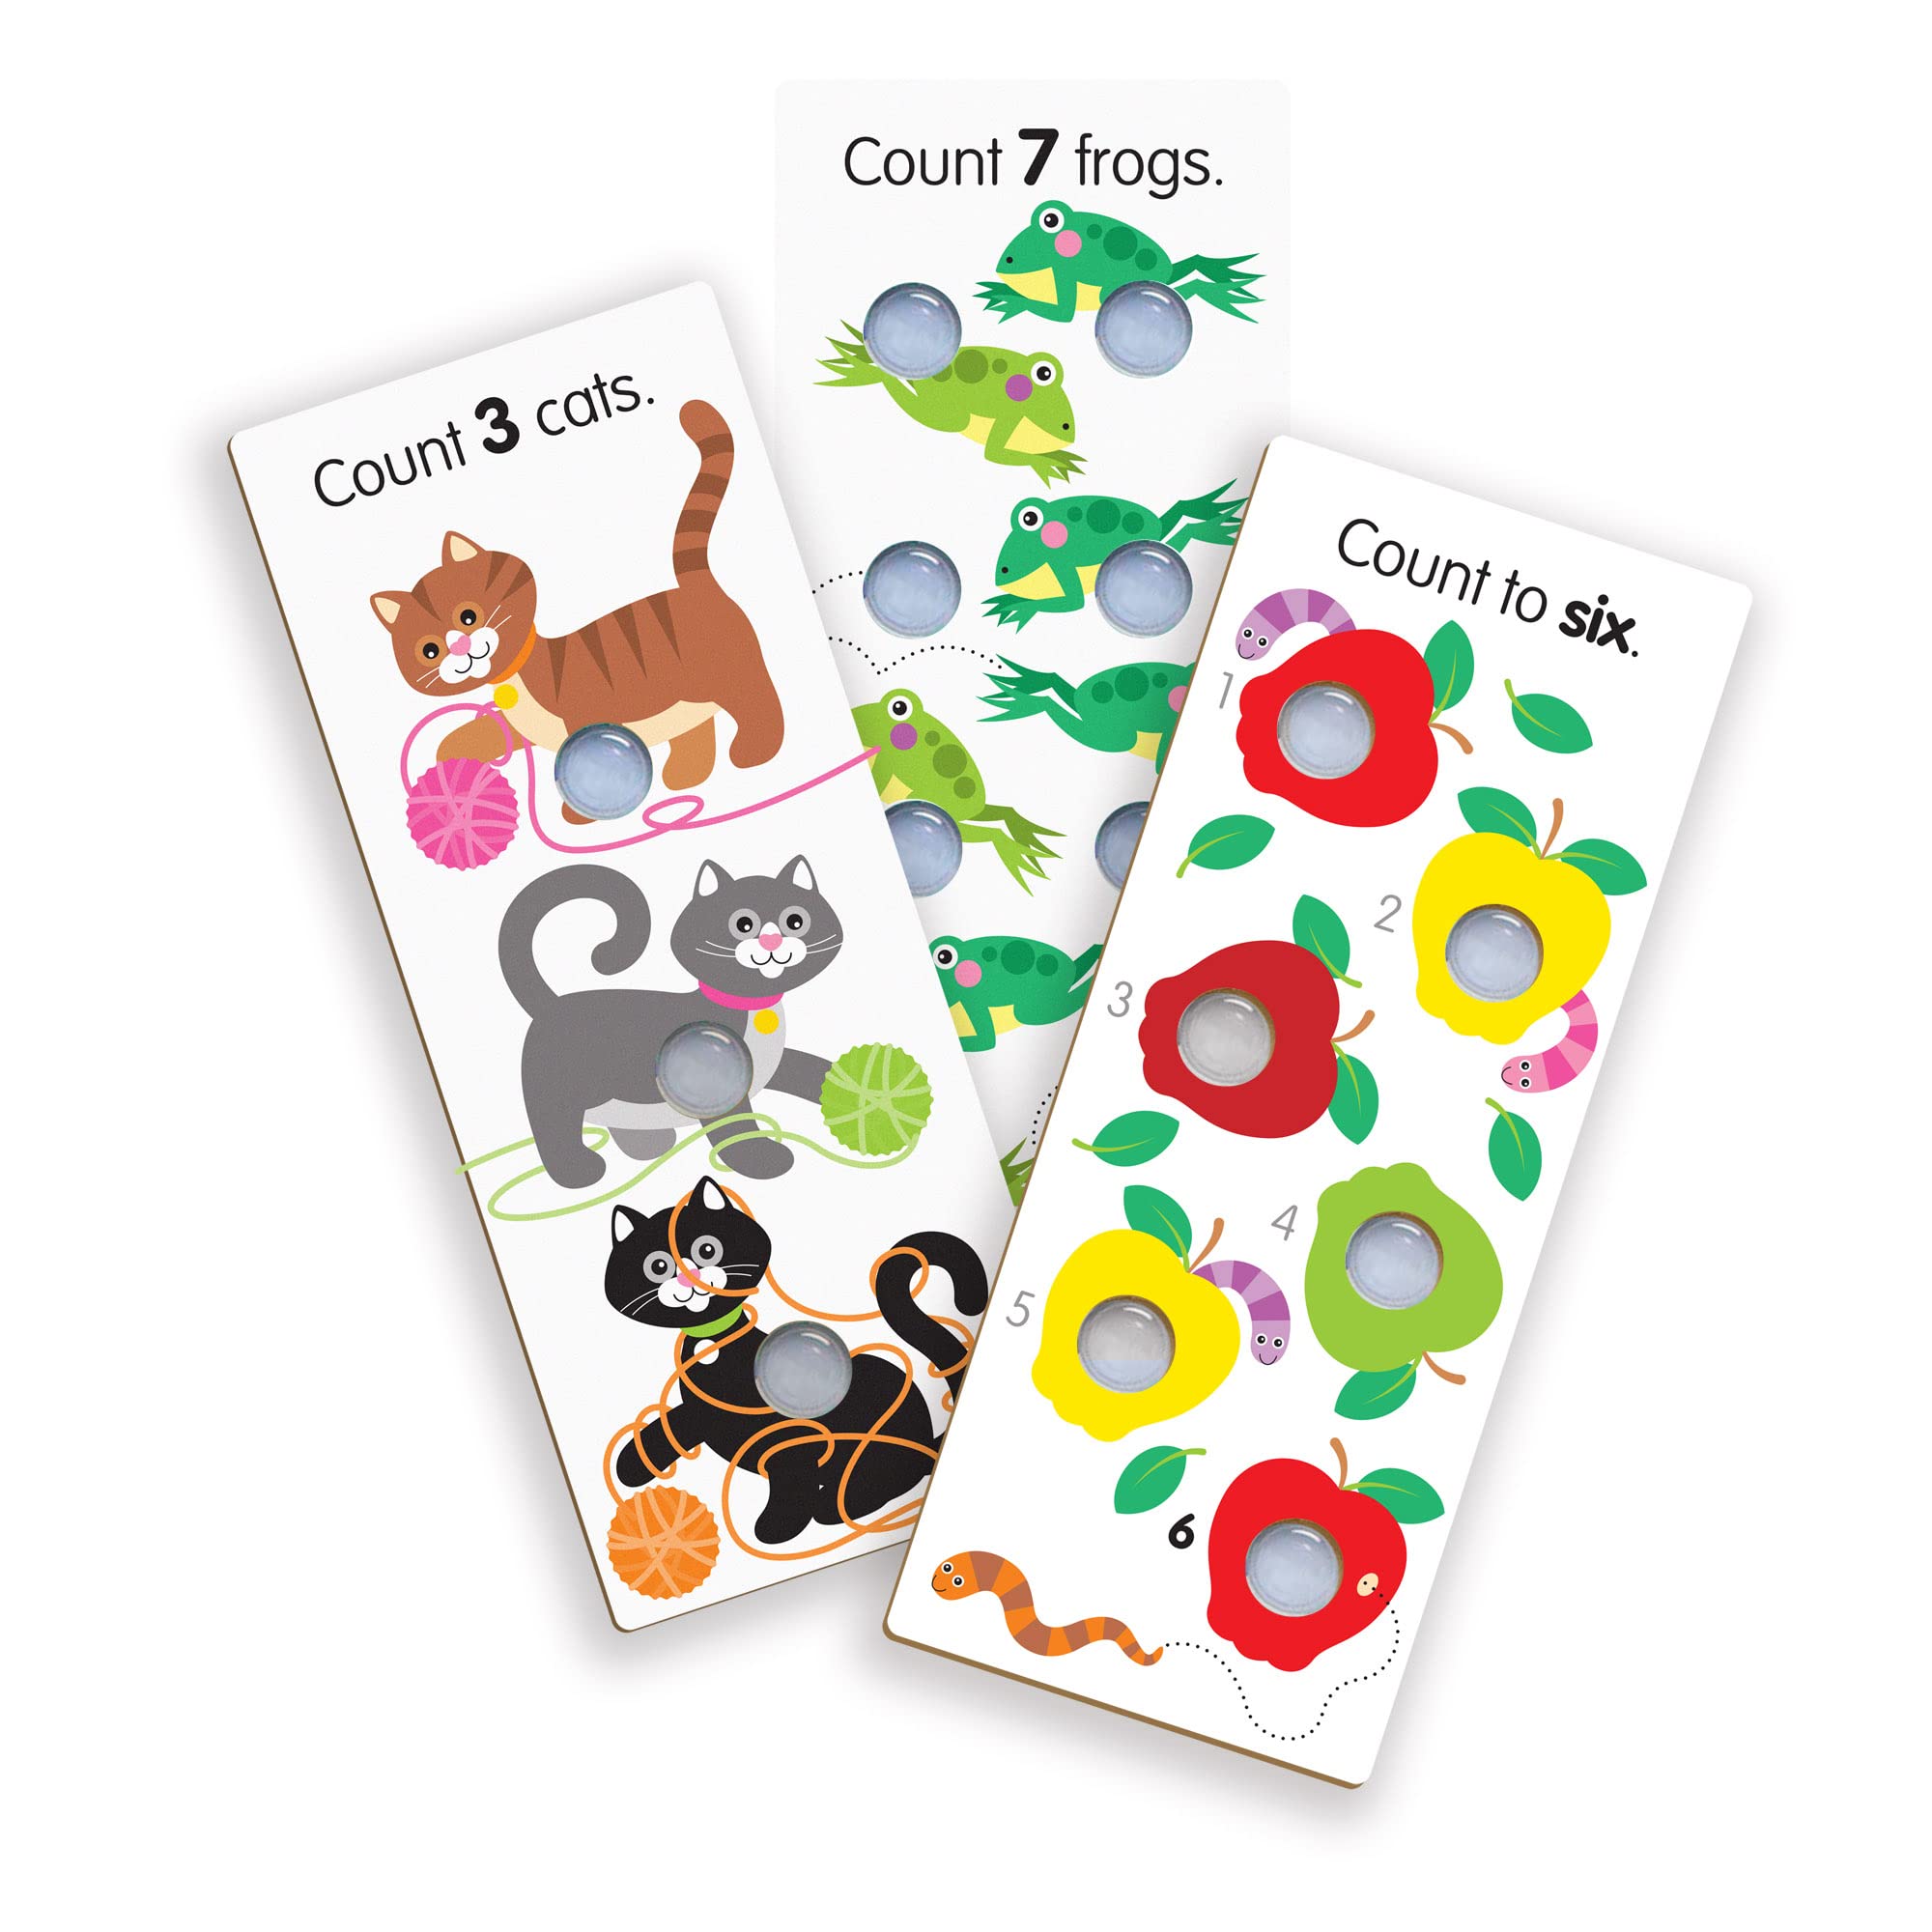 Melissa & Doug Poke-A-Dot Jumbo Number Learning Cards - 13 Double-Sided Numbers, Shapes, and Colors Cards with Buttons to Pop - Poke A Dot Book Oversized Interactive Learning Activity Cards For Kids